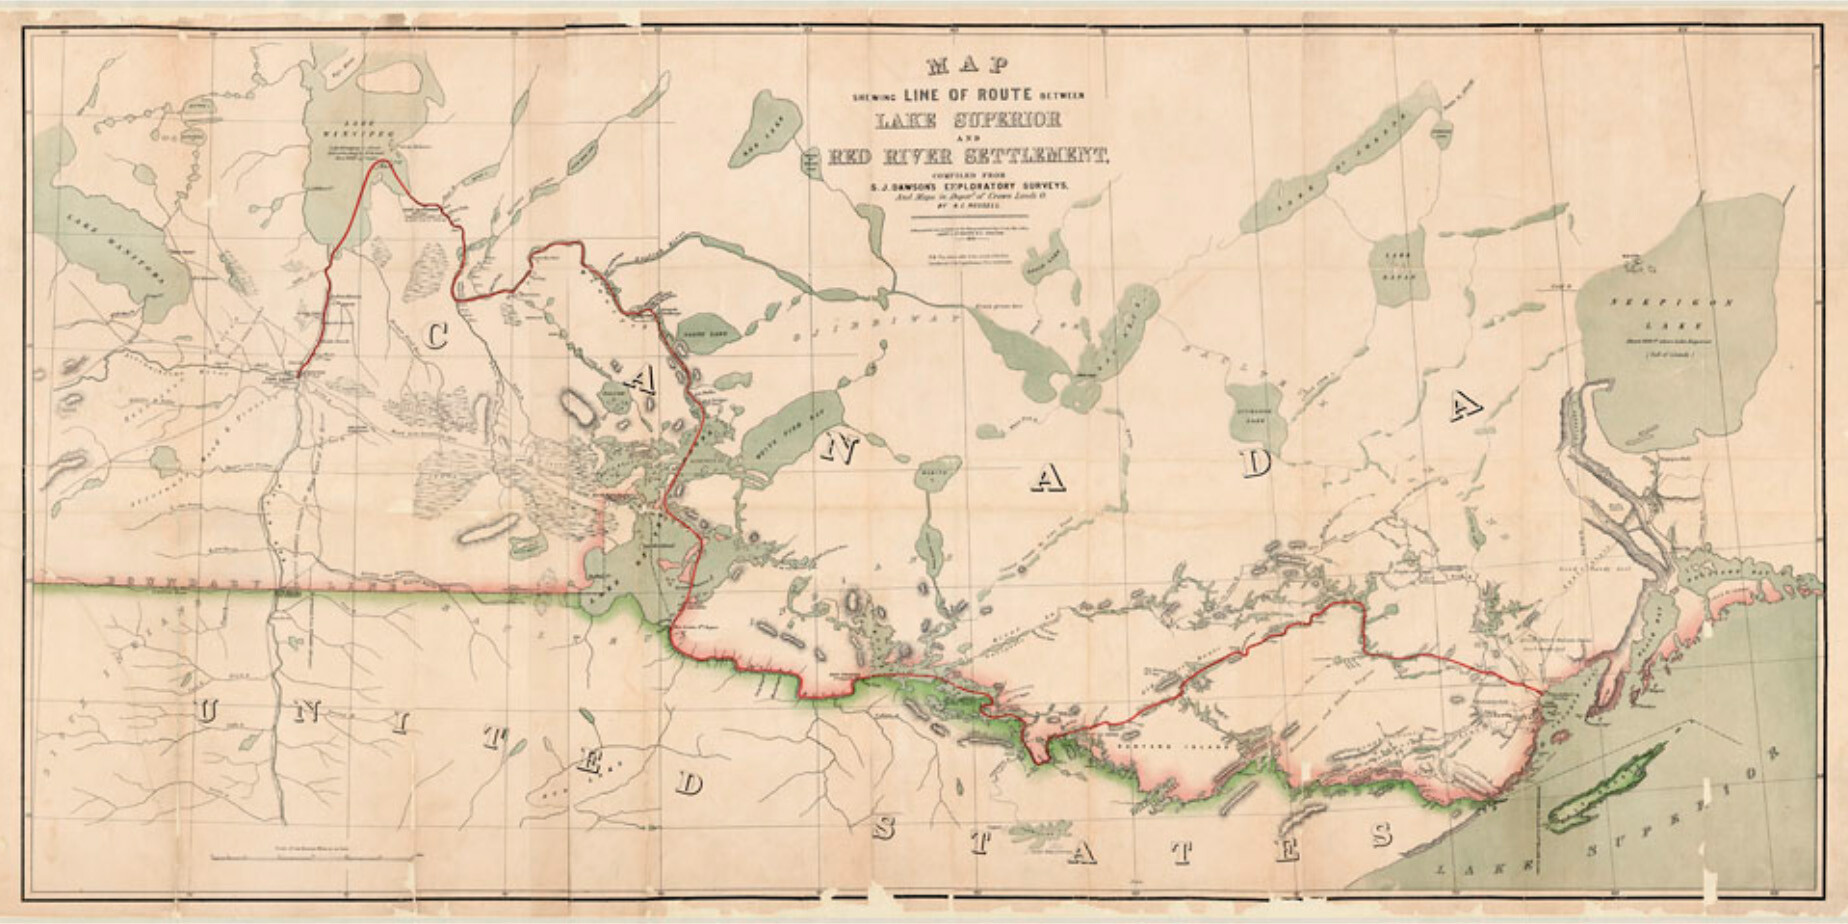 Map showing lines of route between Lake Superior and Red River Settlement, 1870. Photo: Library and Archives Canada, 4156084.